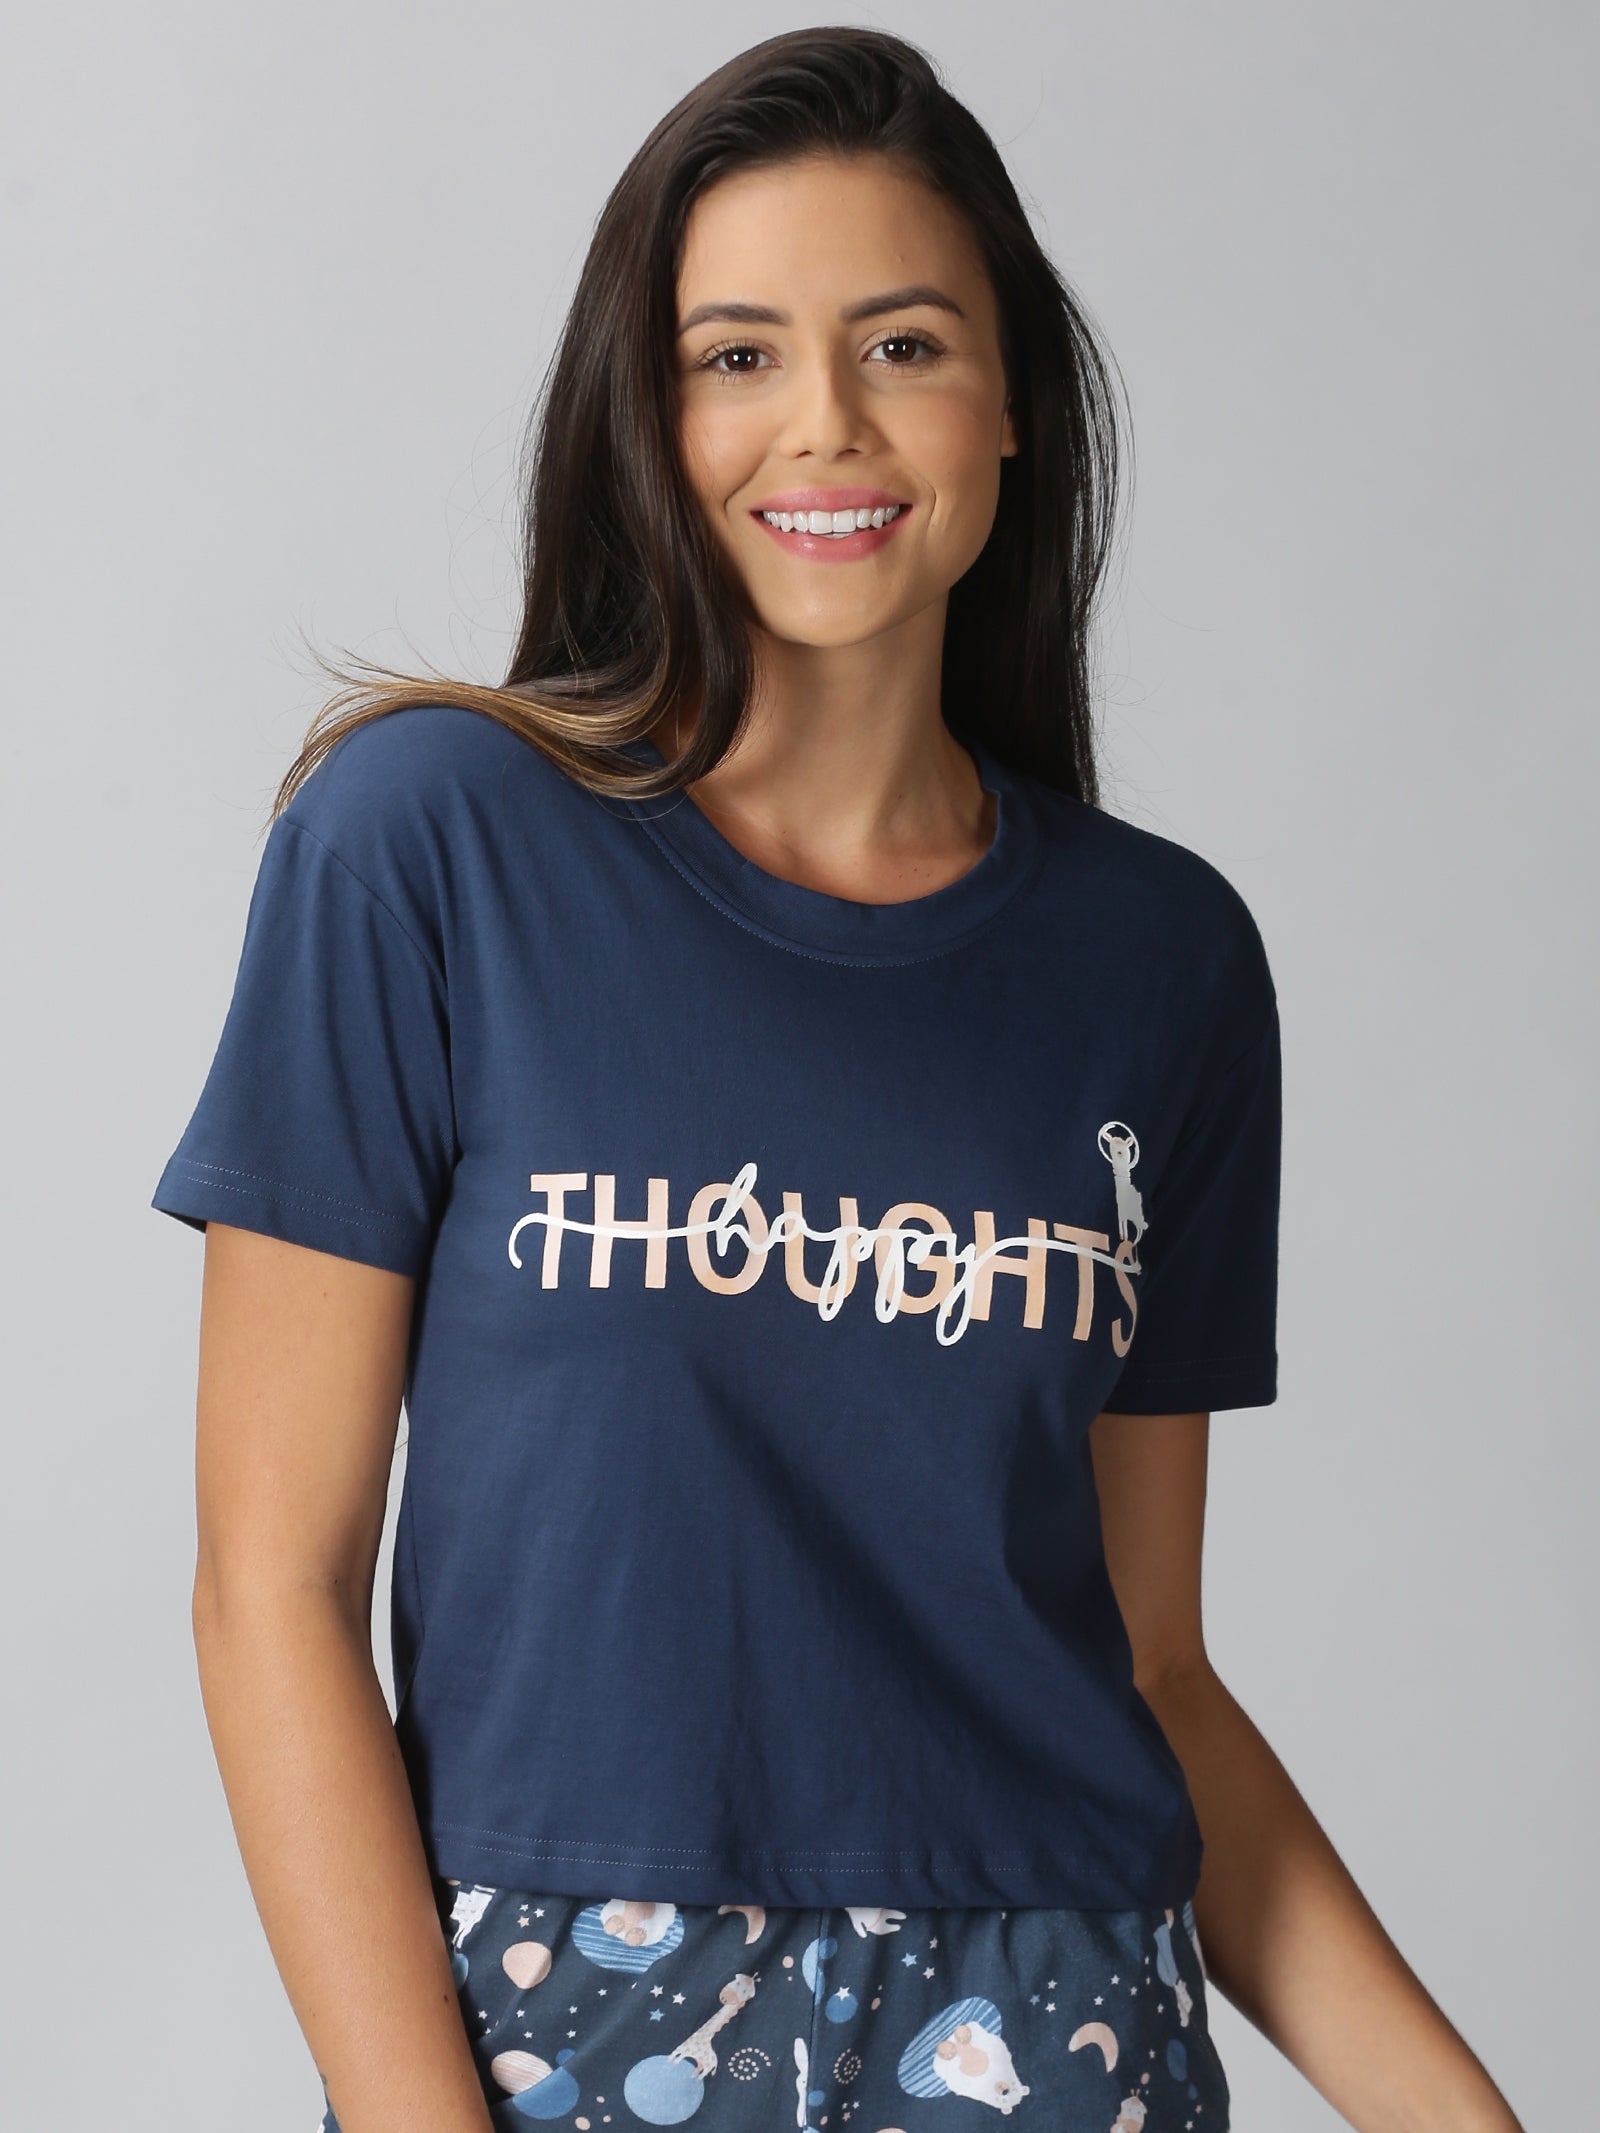 Happy thoughts - Navy shorts set